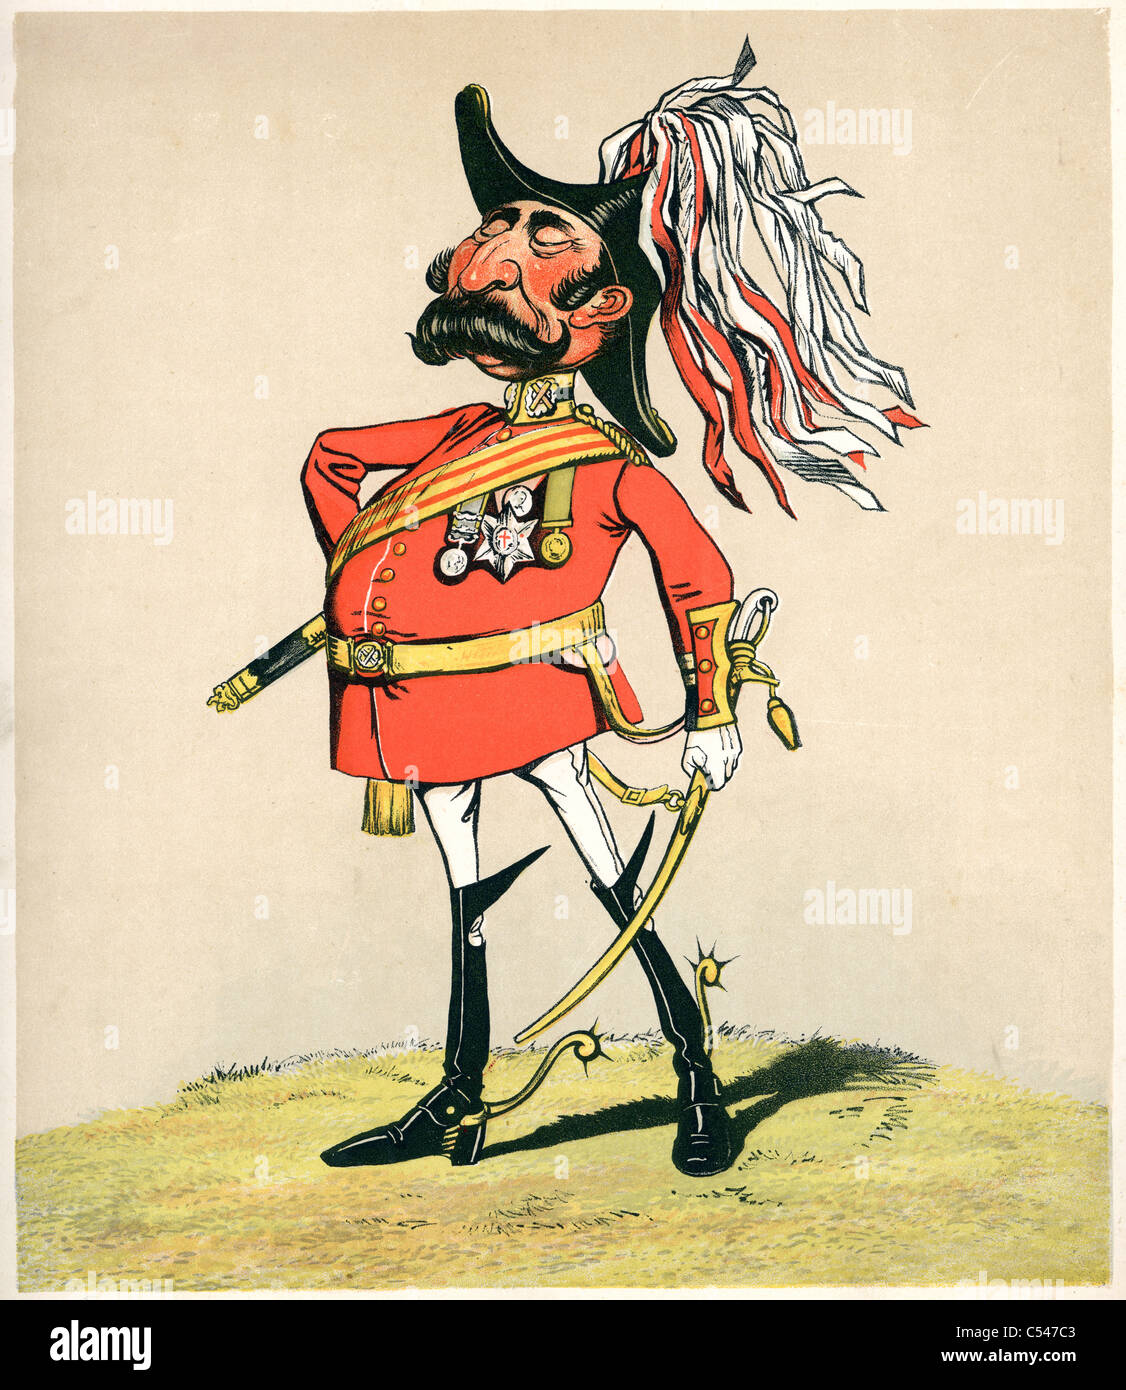 Caricature of a Field Marshal in the British Army. Field Marshal is the highest military rank of the British Army. Stock Photo